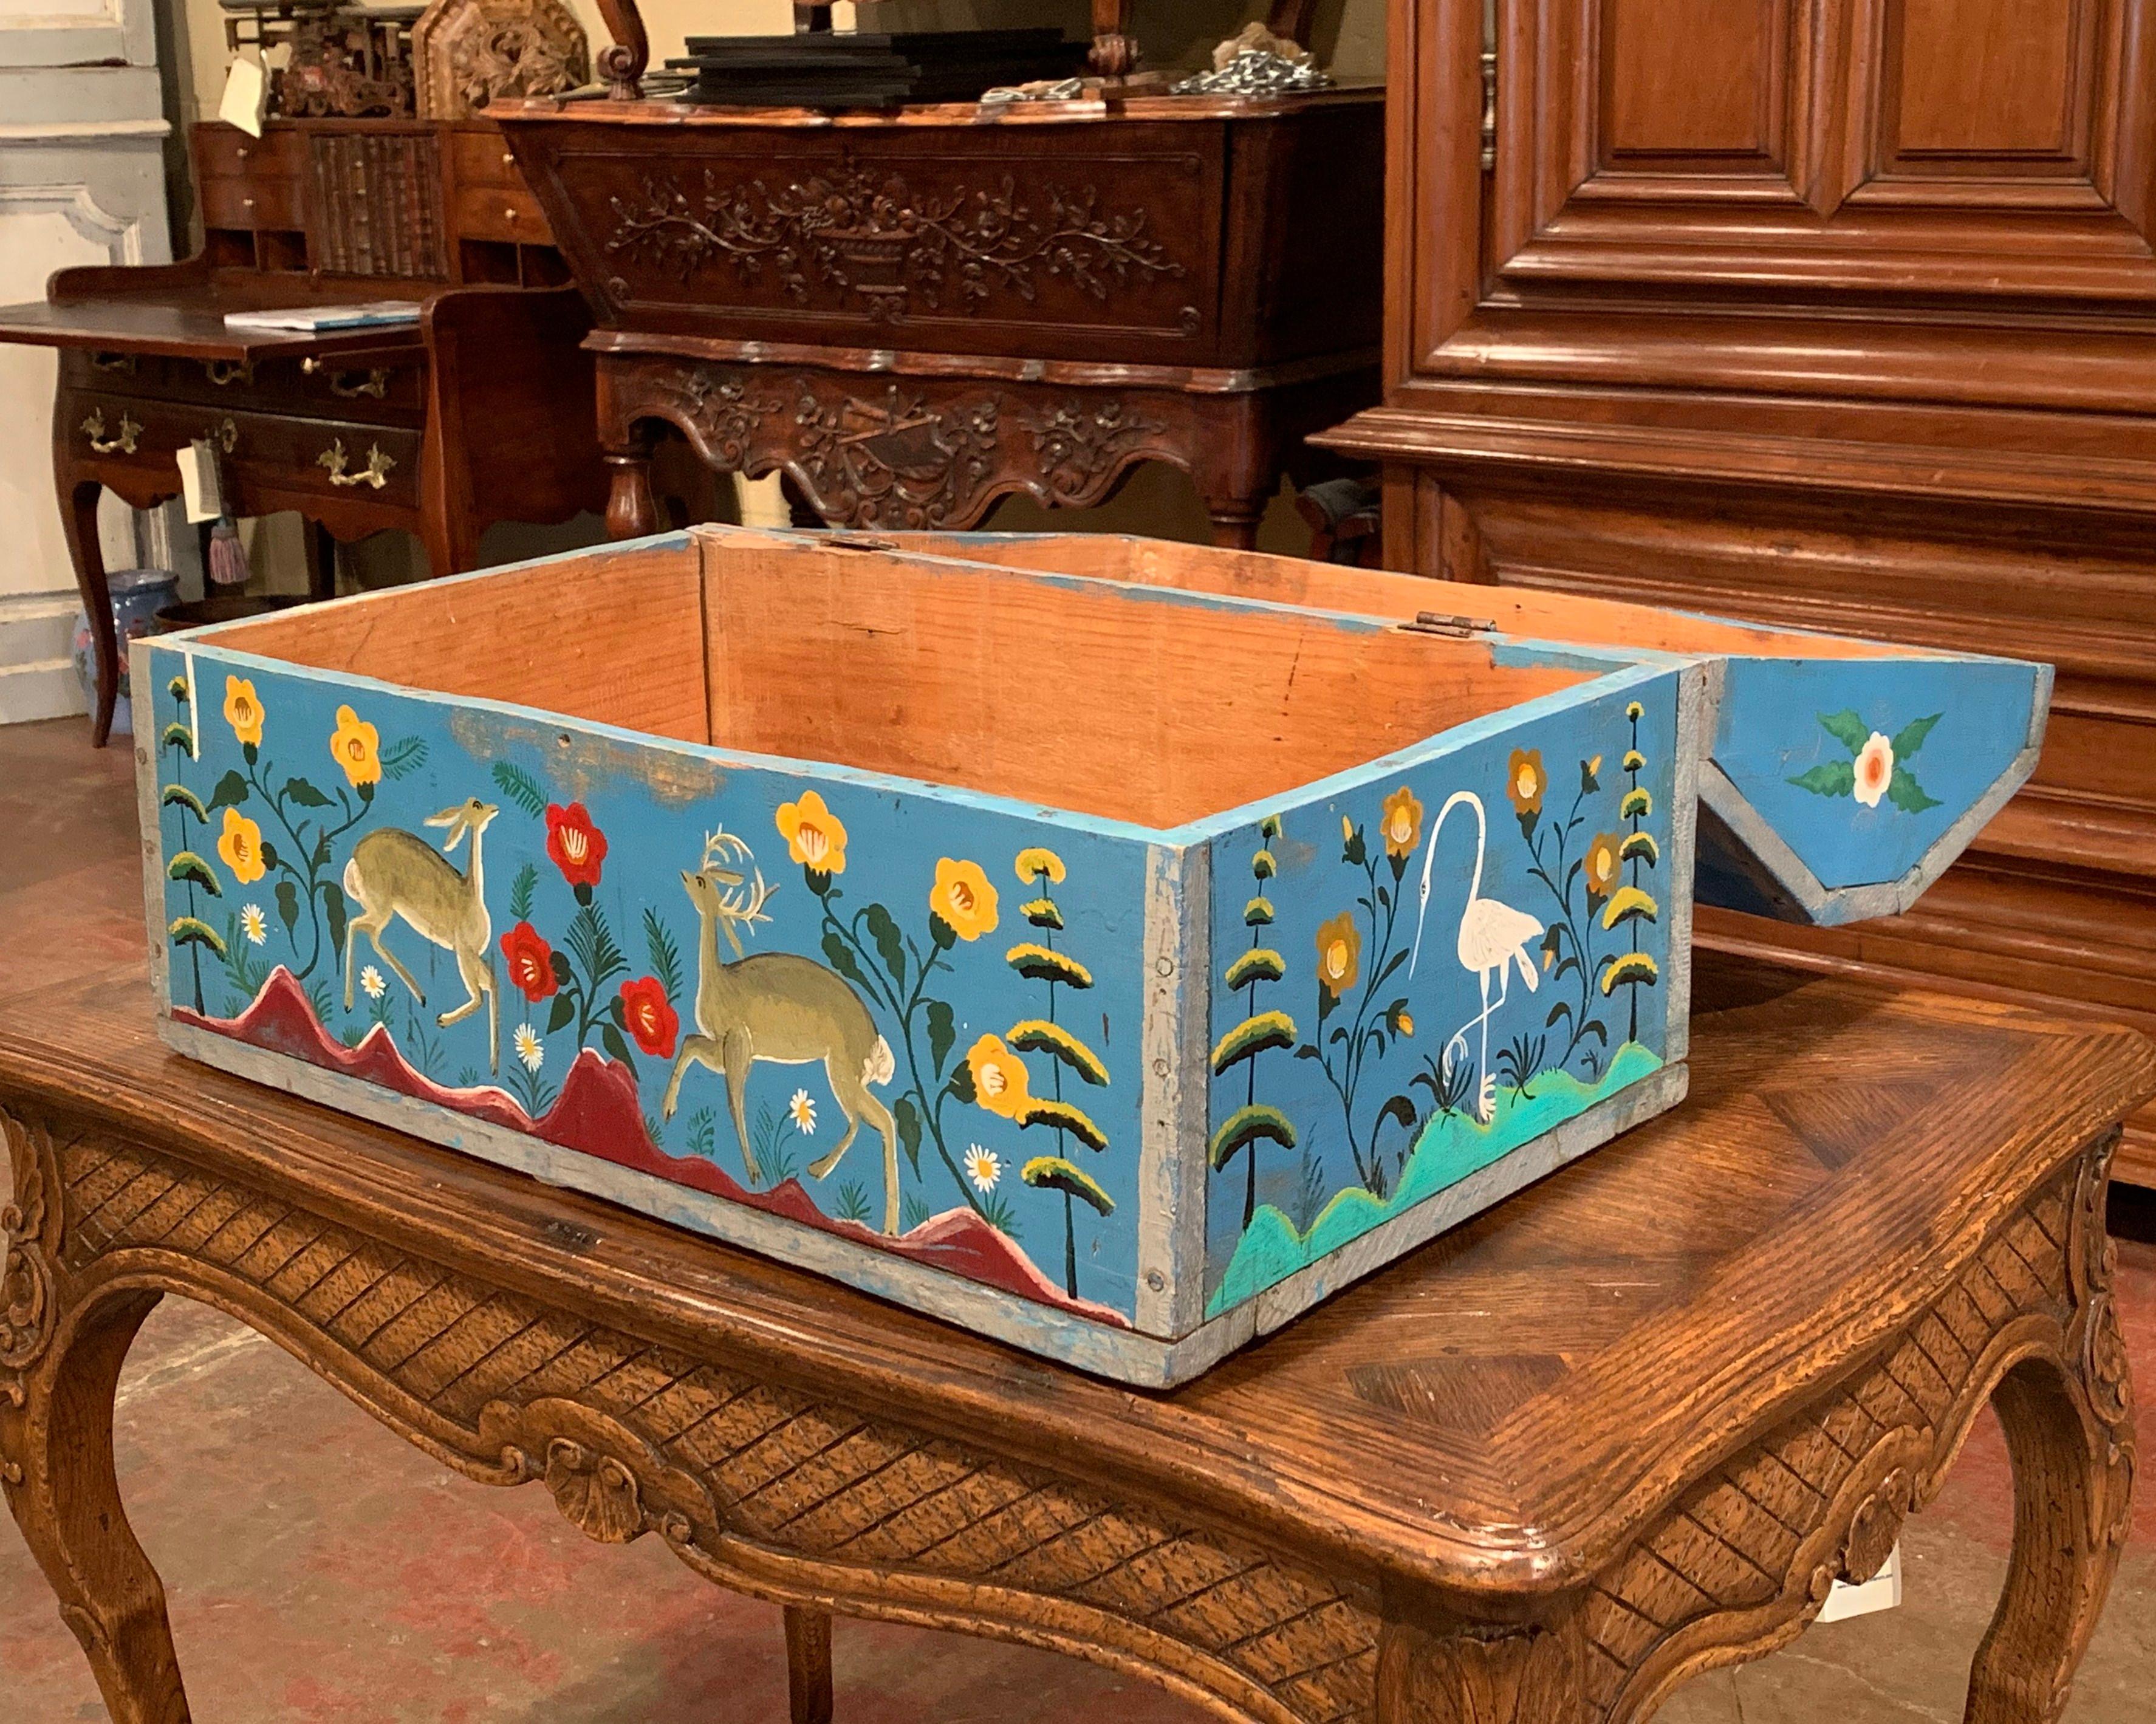 Oak 19th Century French Hand Painted Trunk with Rabbit and Deer Motifs from Normandy